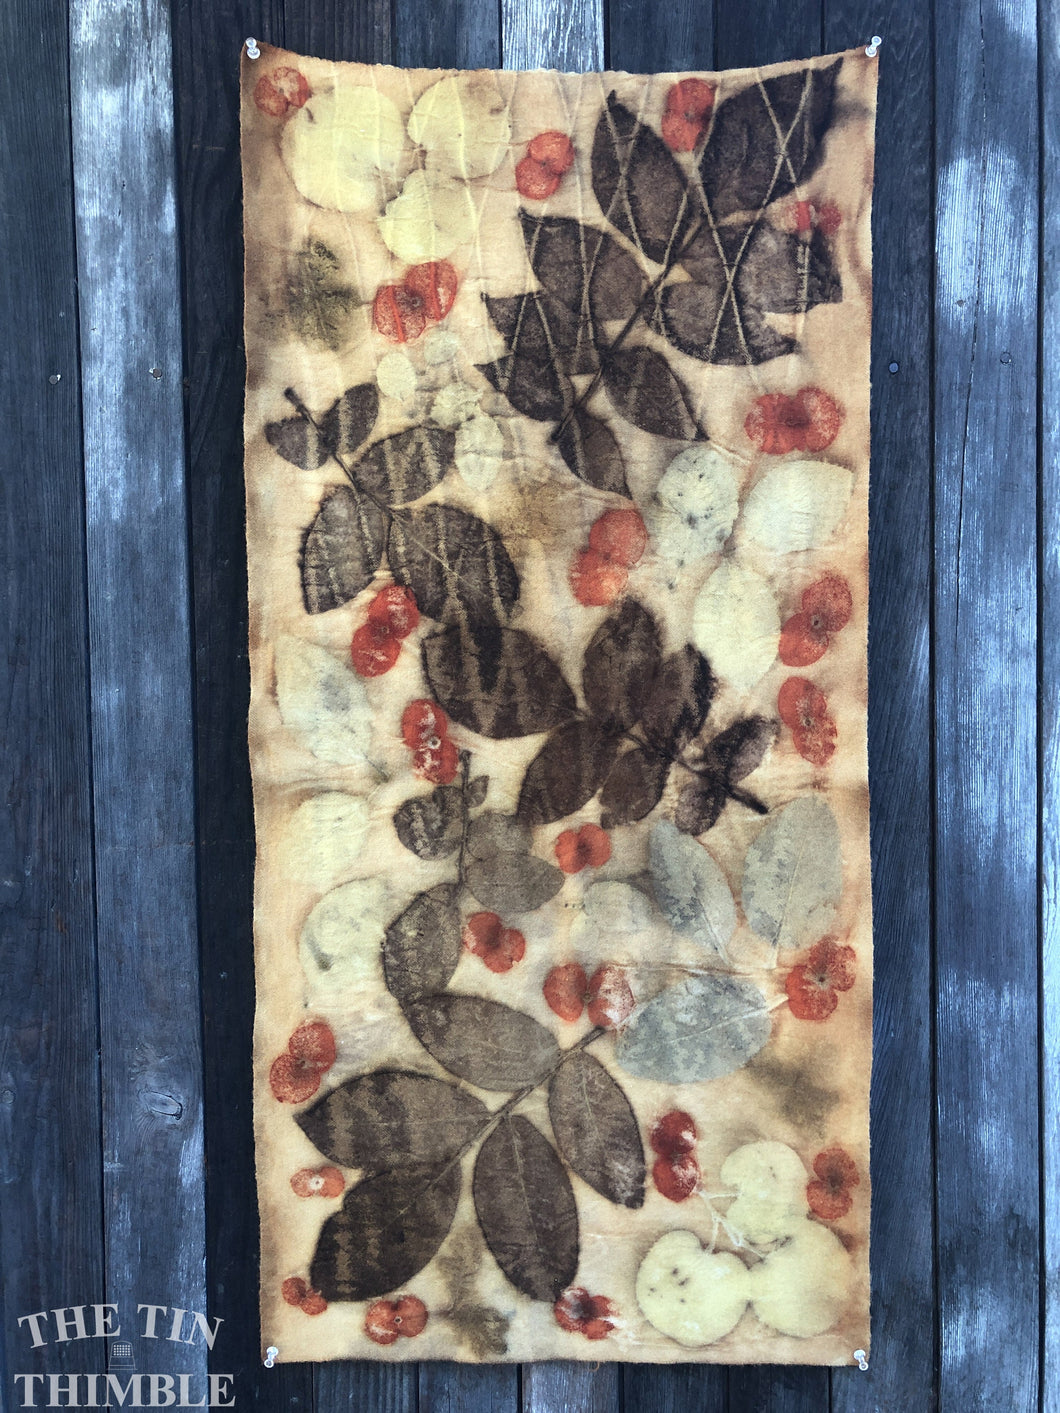 Botanical Printed Table Runner by Sharon Mansfield  - Natural Leaves Printed on USA Produced 100% Wool Fabric - Colorfast & Washable